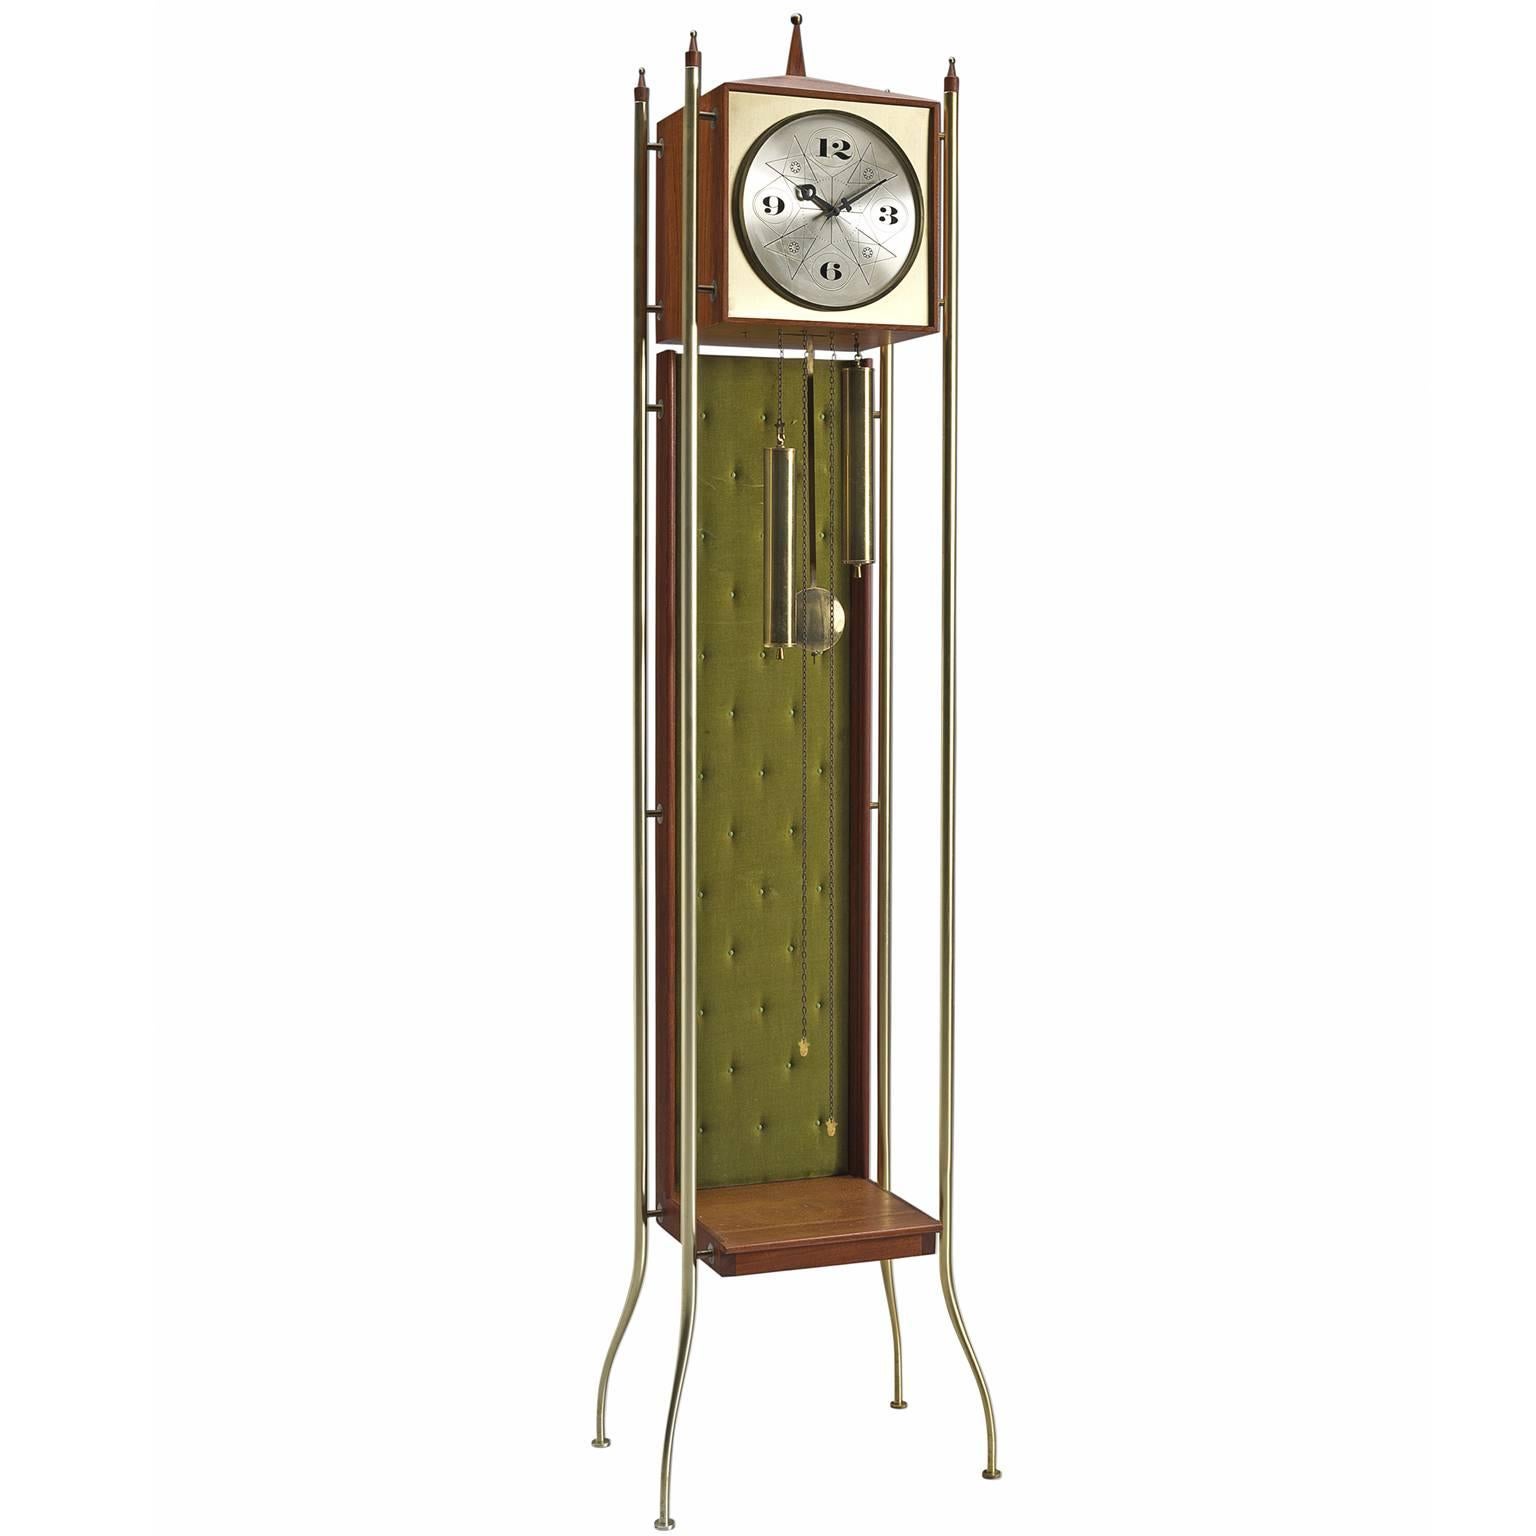 Swag-Leg Grandfather Clock by George Nelson, 1957